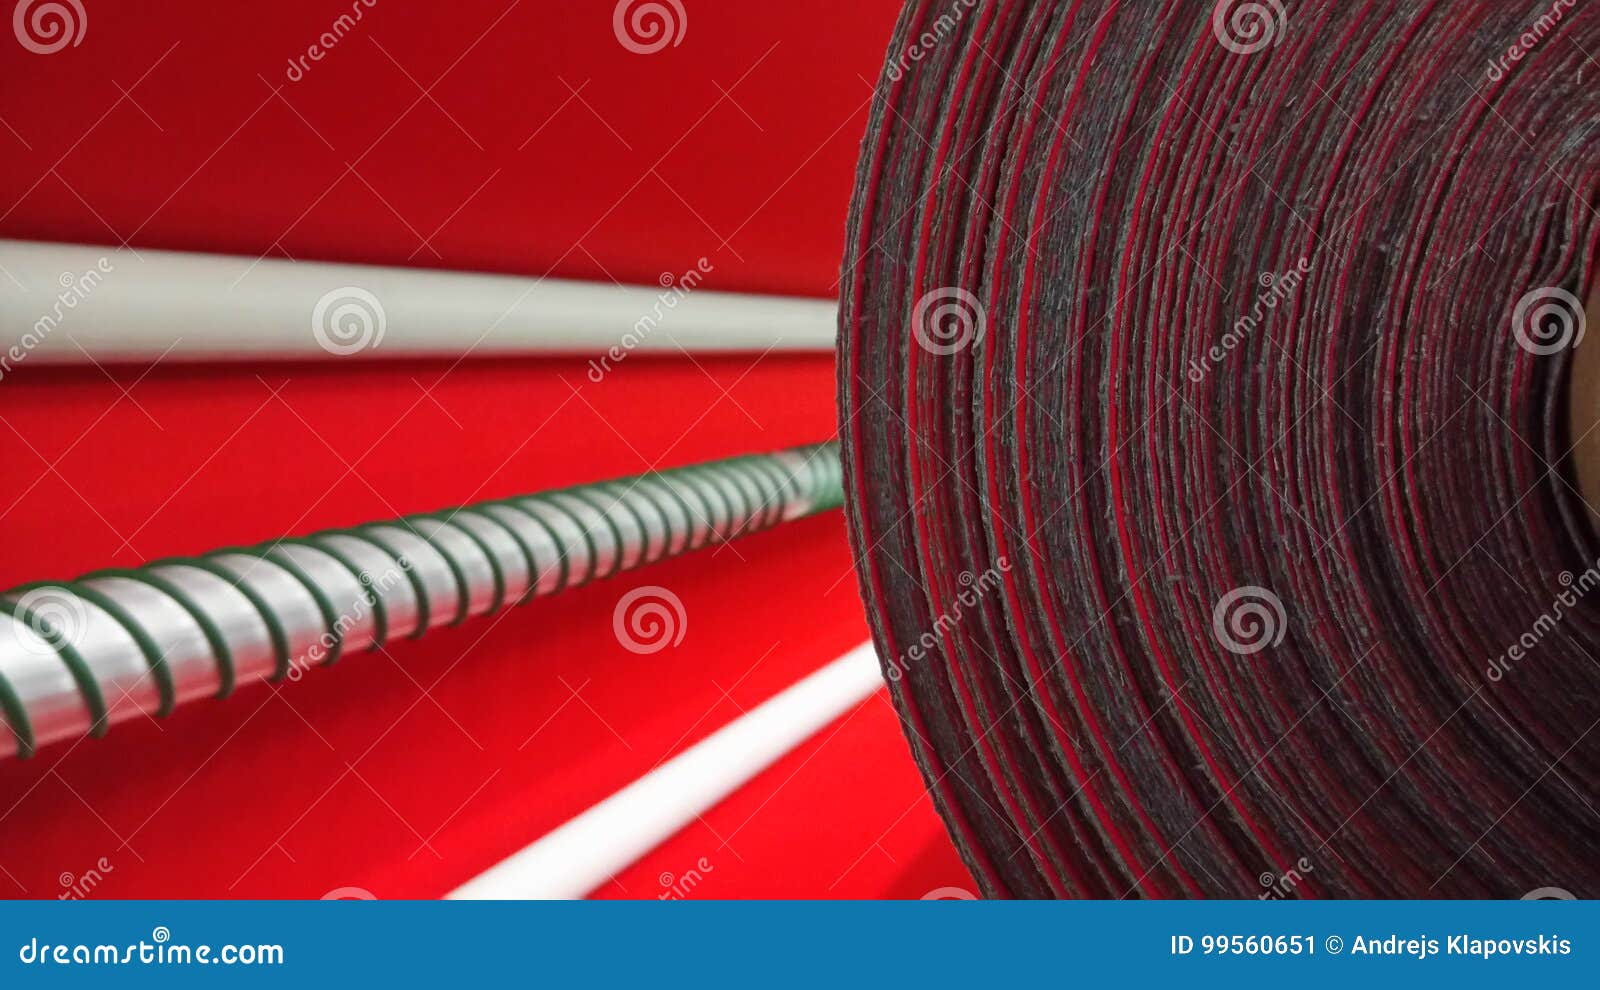 New Industrial Red Roll, Red Background. Concept: Material, Fabric